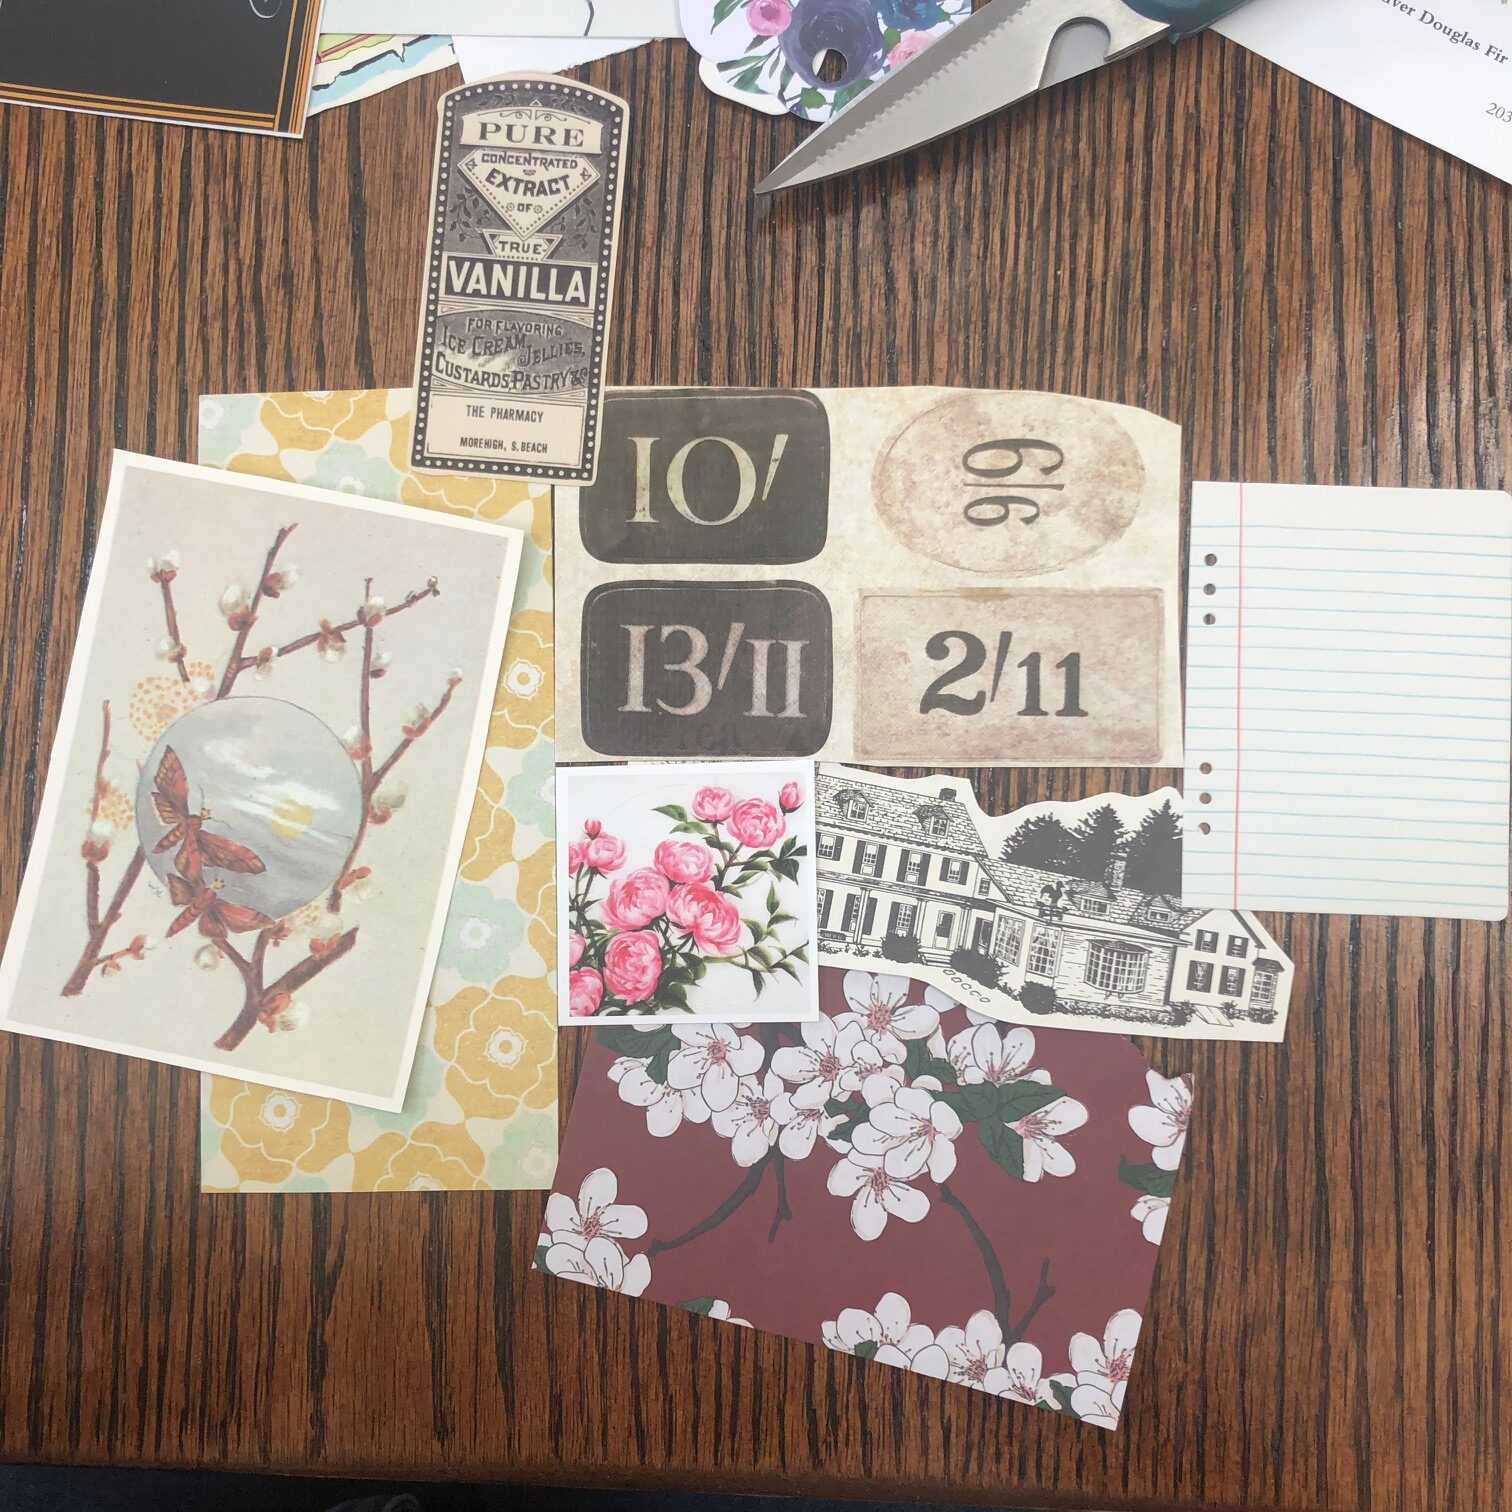 Patterned papers, a cutout of butterflies, floral stickers, and other paper paraphernalia lays on a table. 